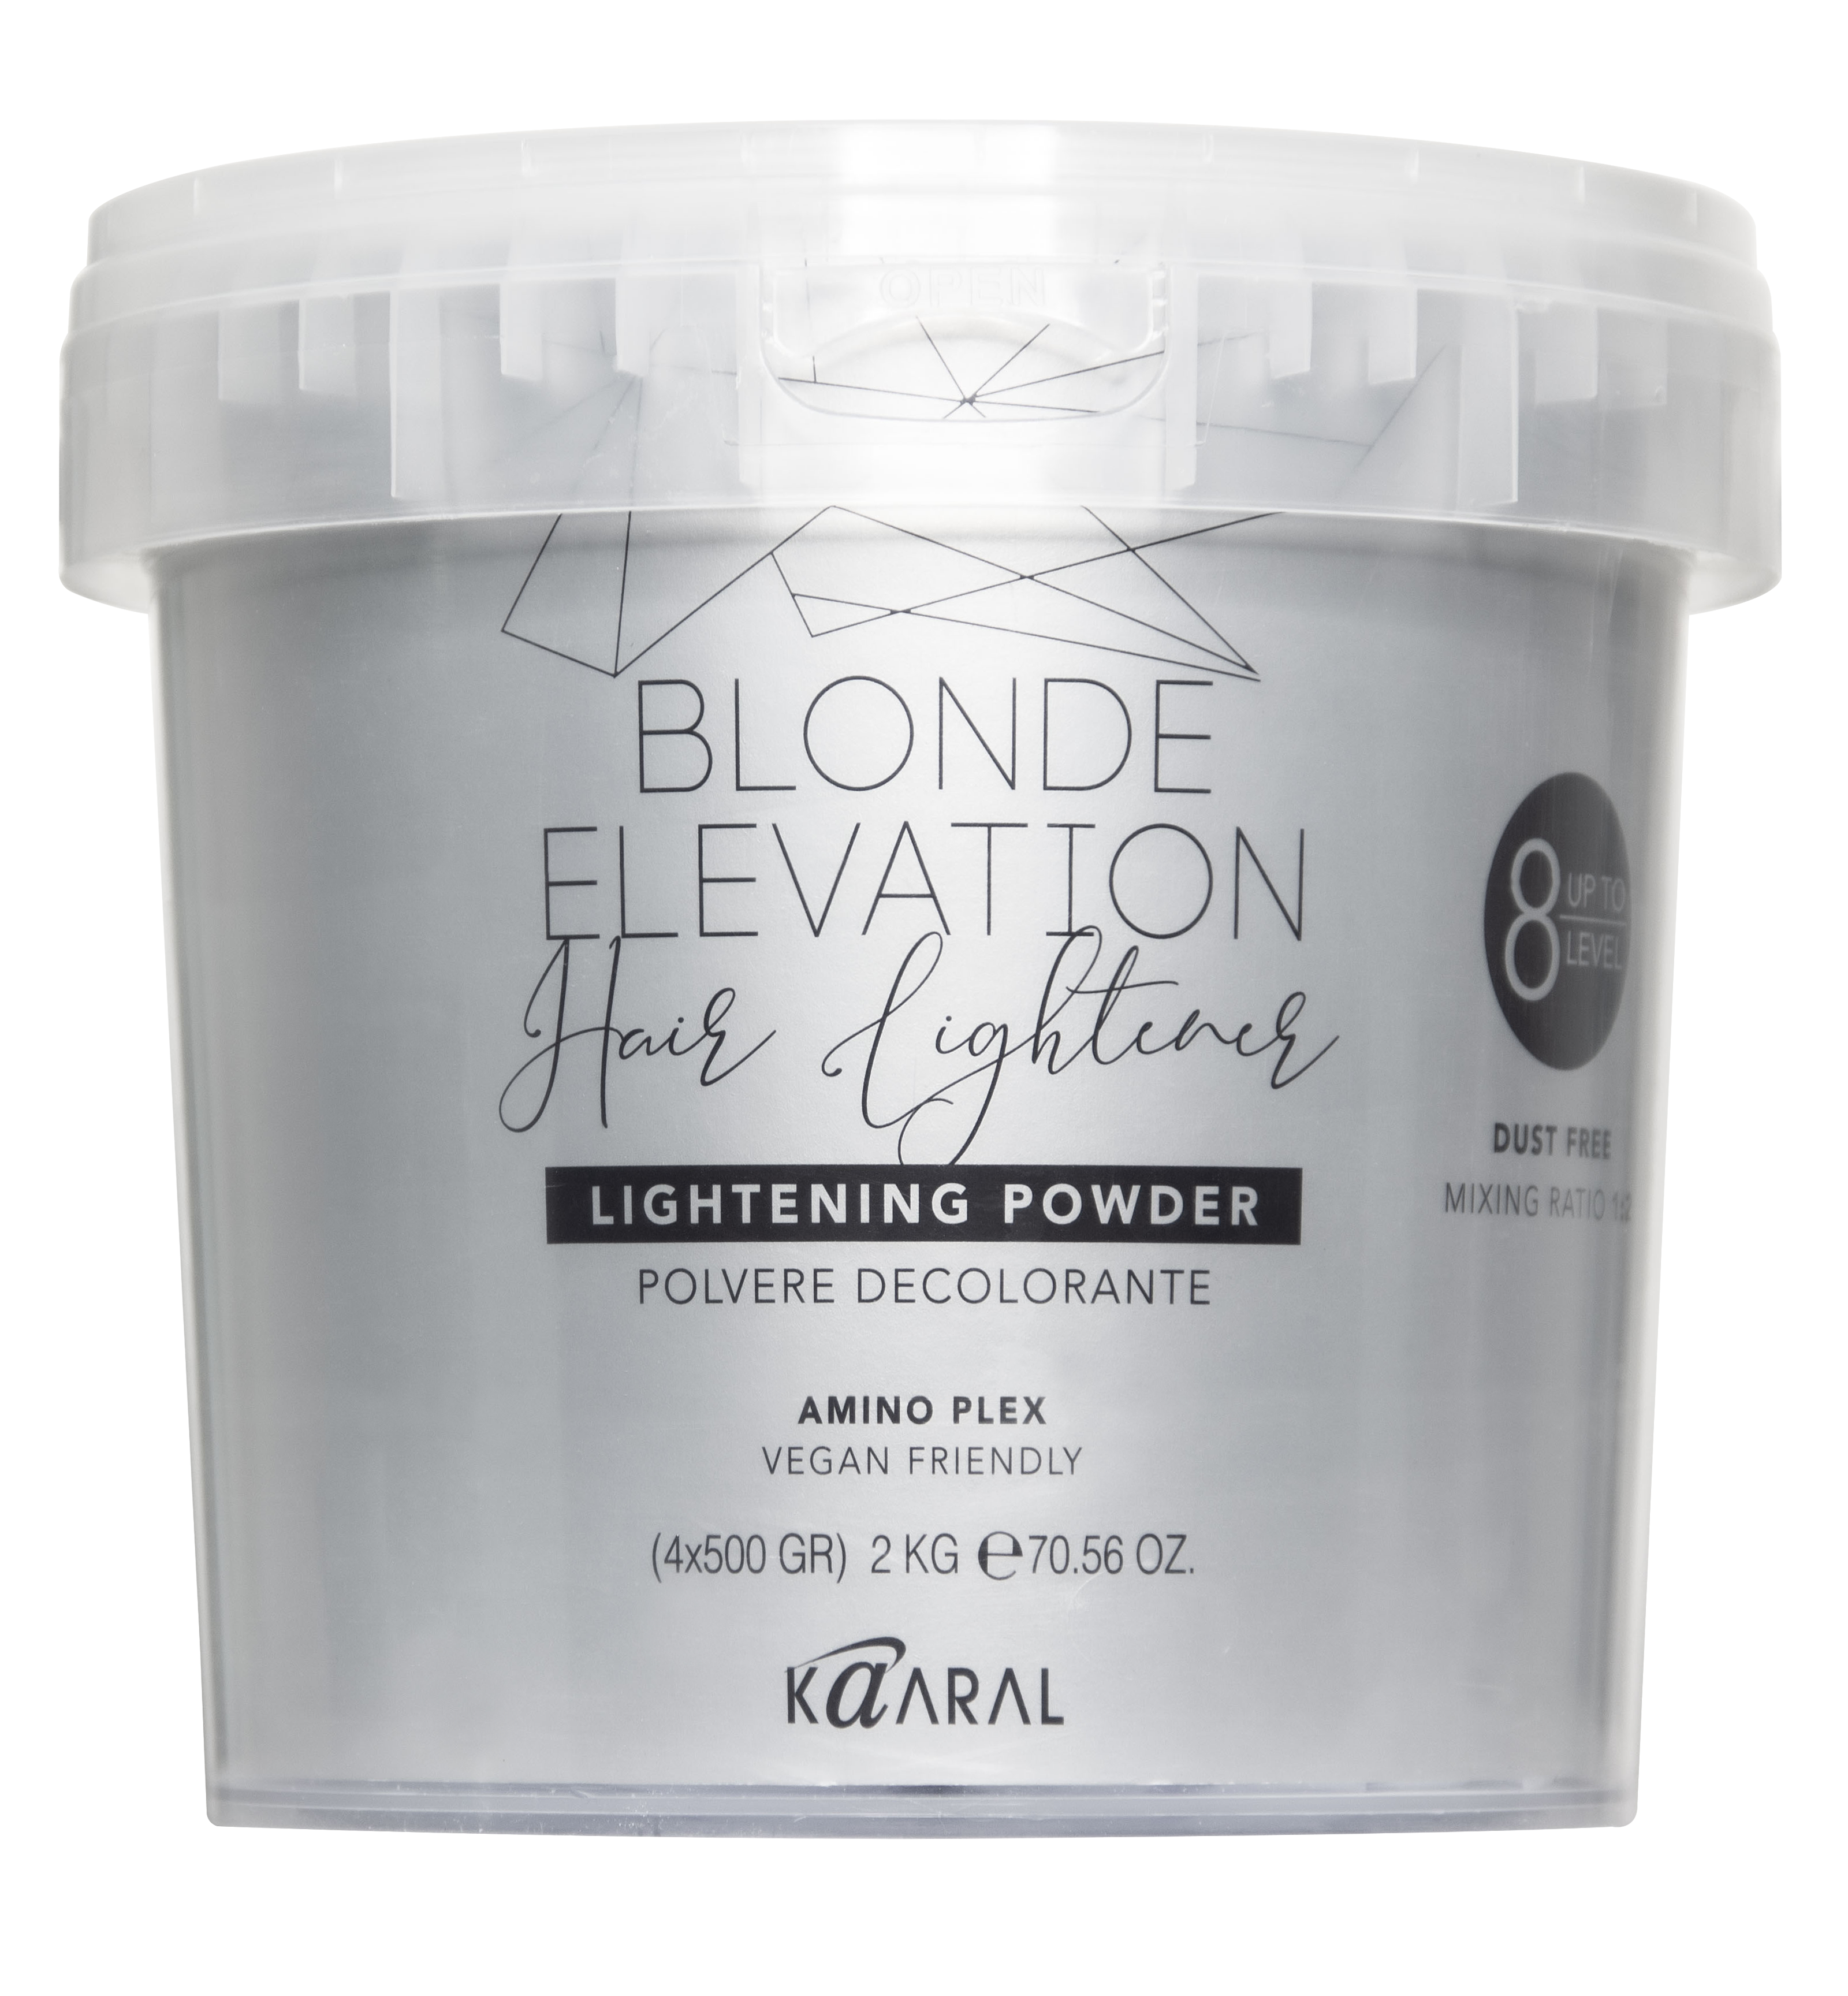 Kaaral - Blonde Elevation Lightening Powder - Creata Beauty - Professional Beauty Products